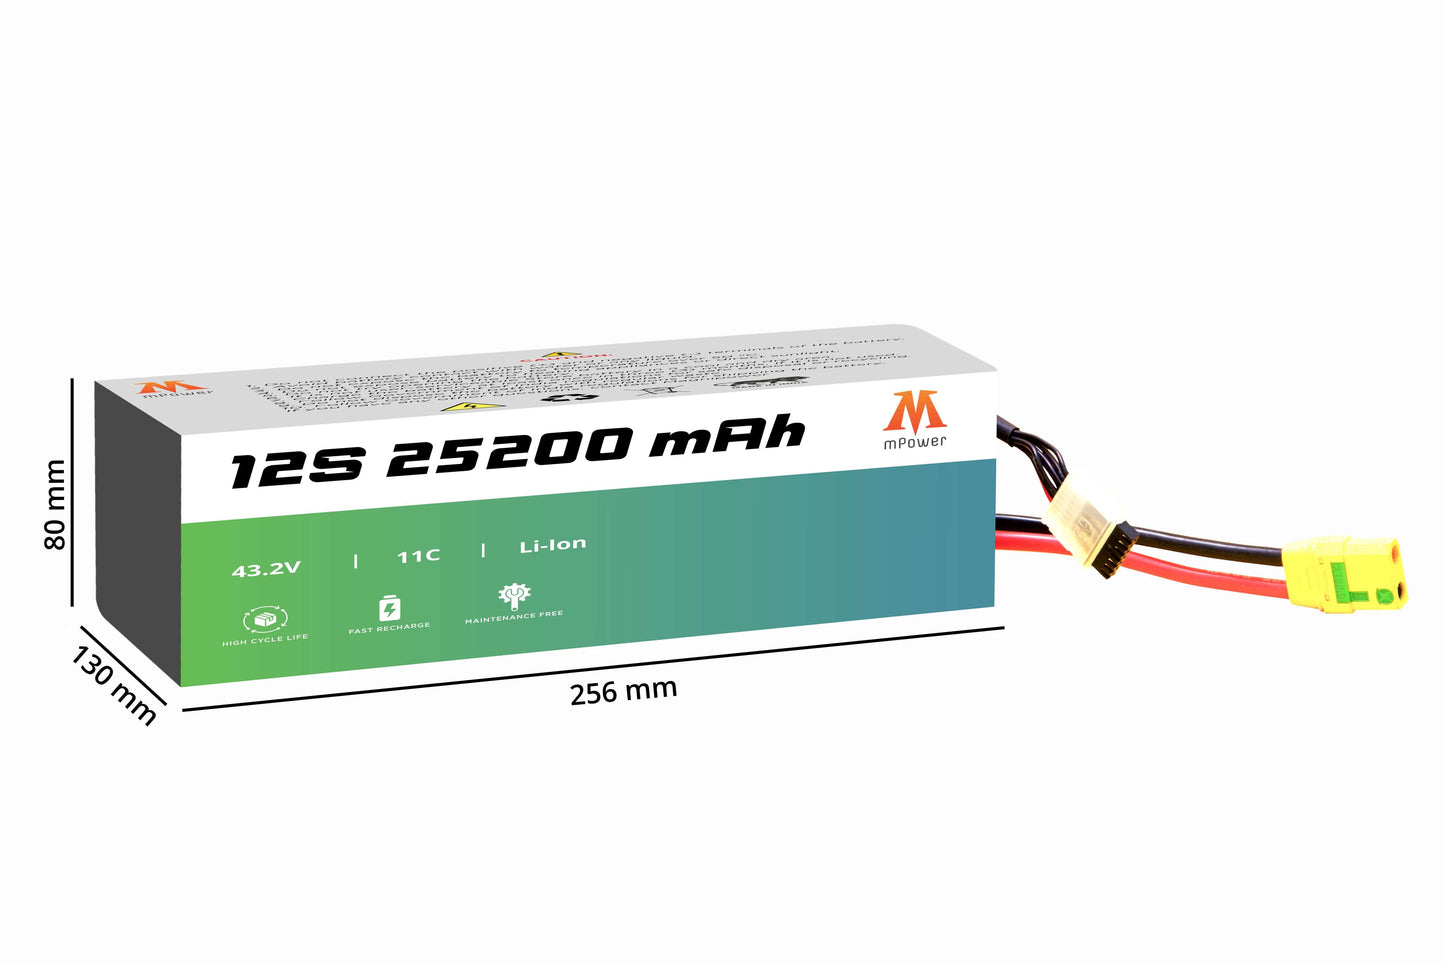 mPower 12S 25200mAh Lithium-Ion Battery for Agricultural Spraying Drones-mpowerlithium